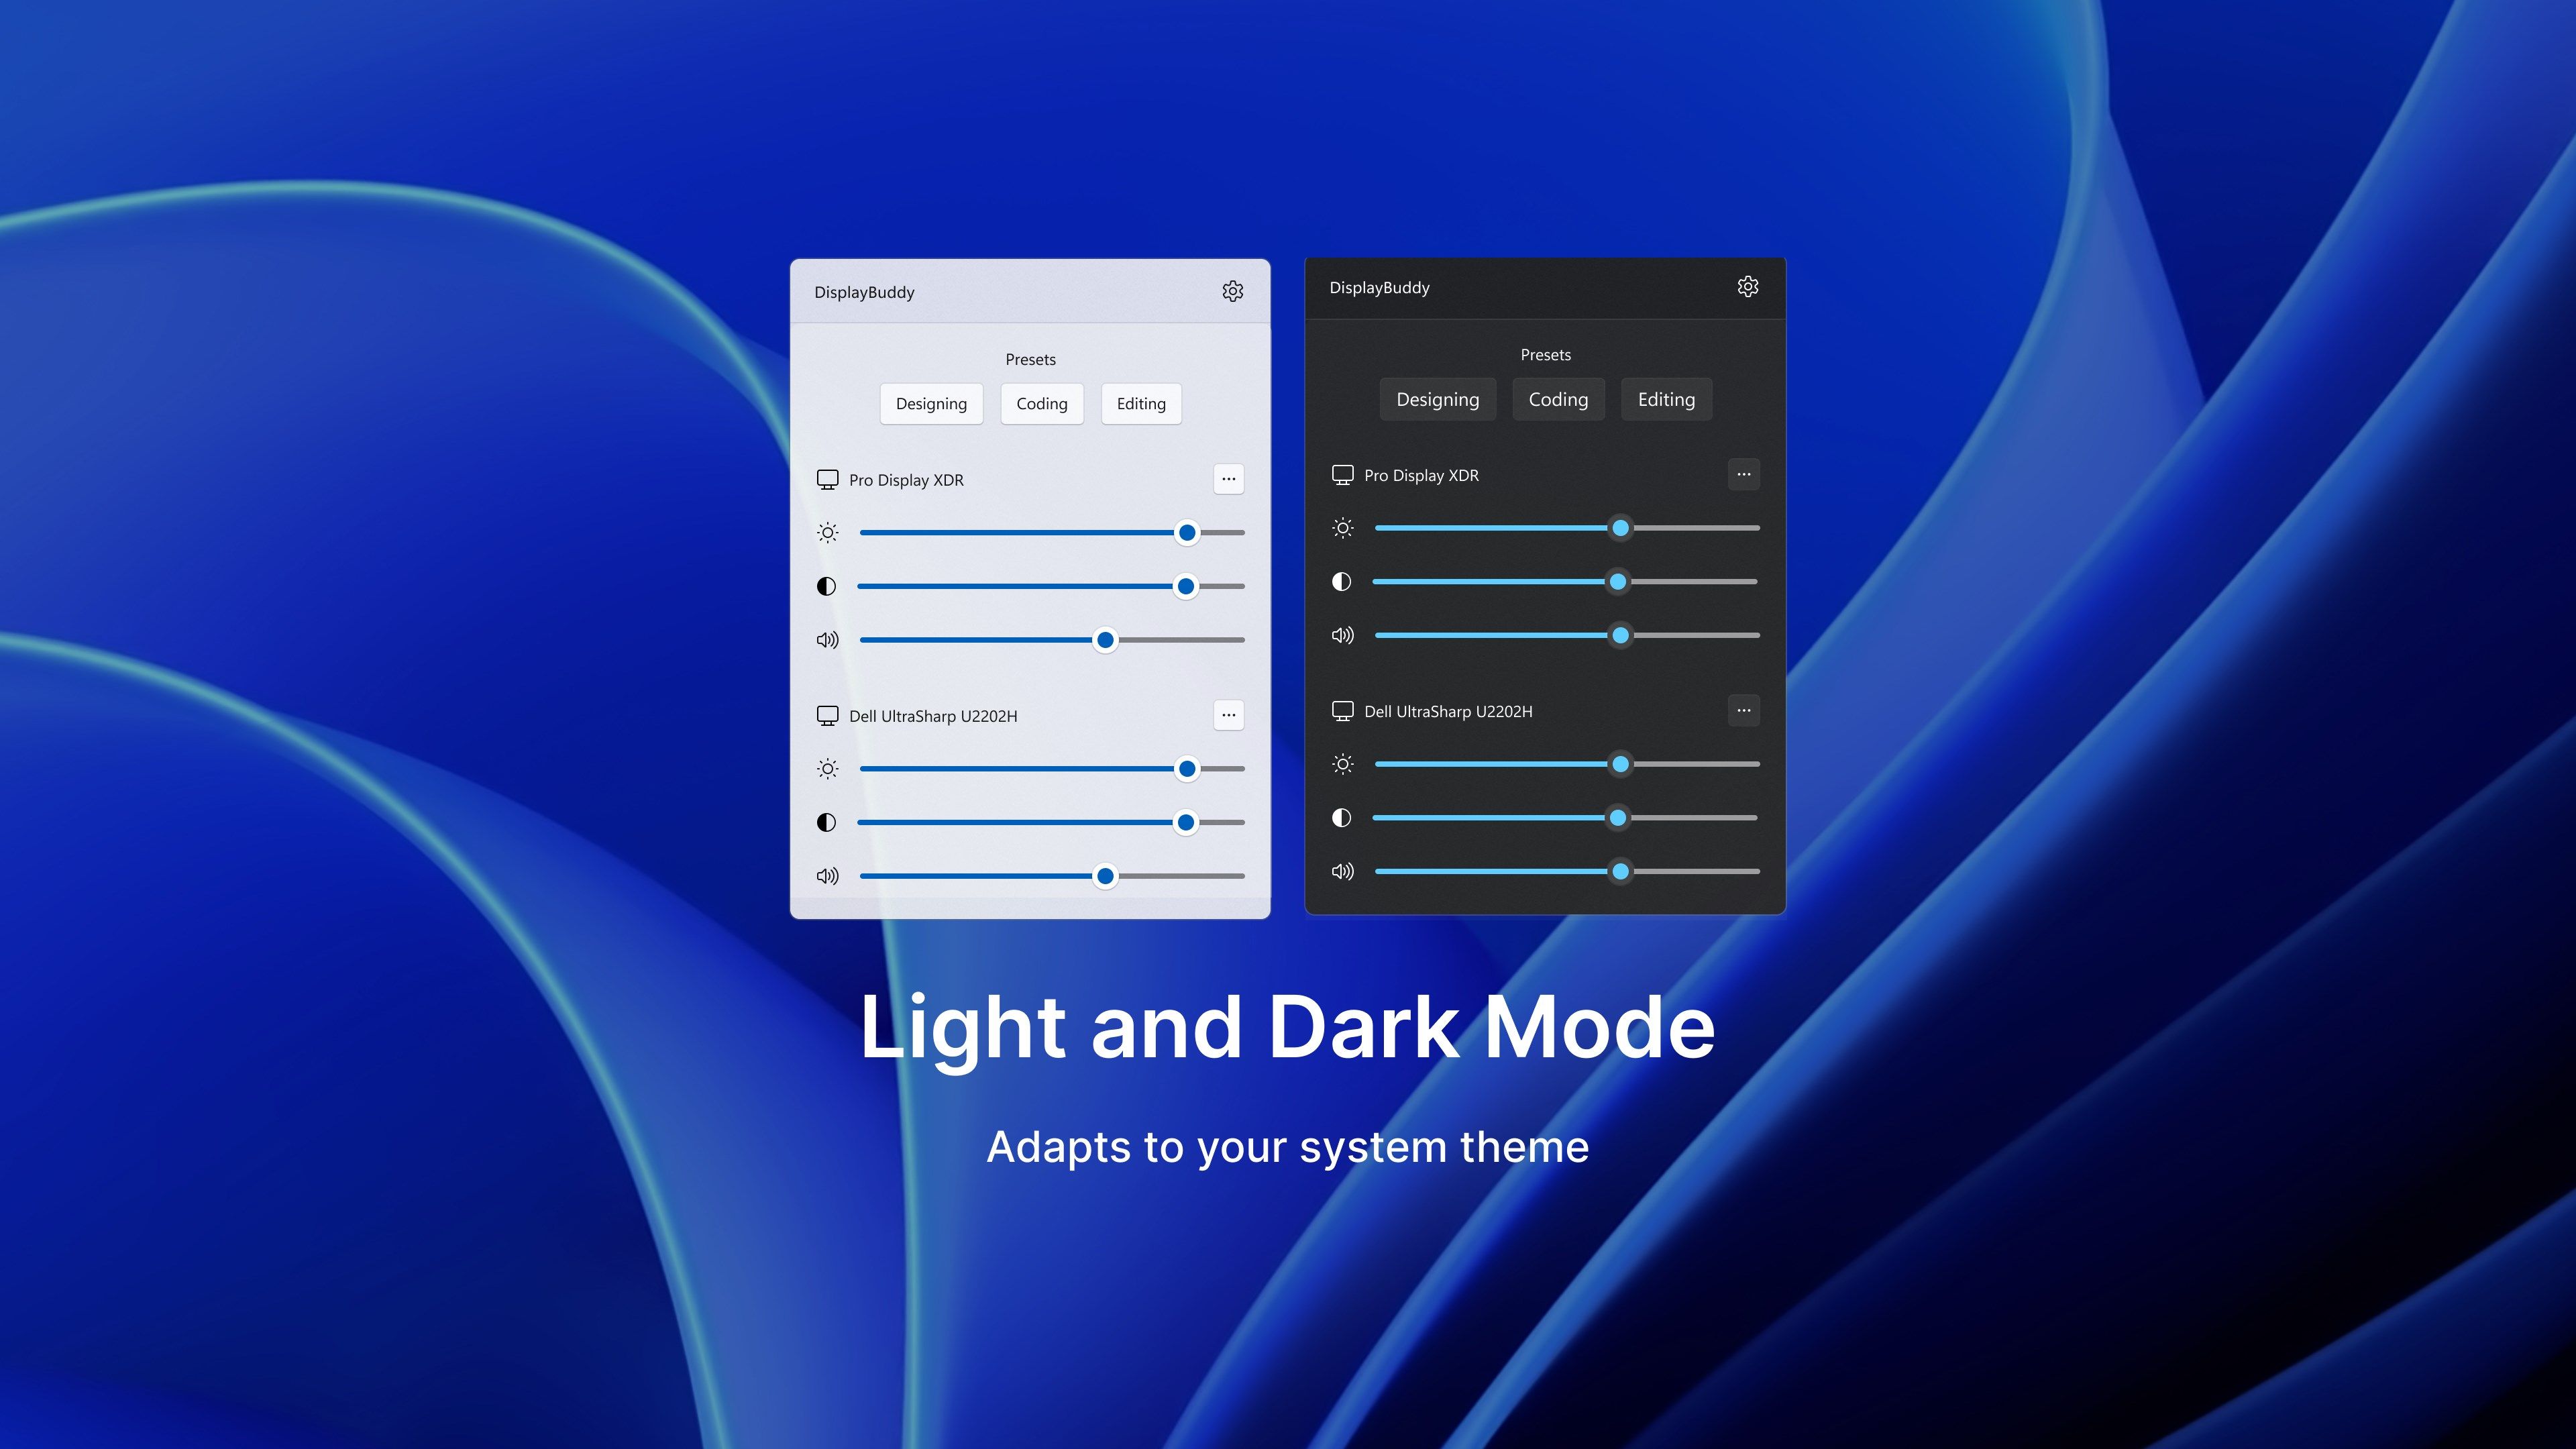 Looks great in both light and dark mode!